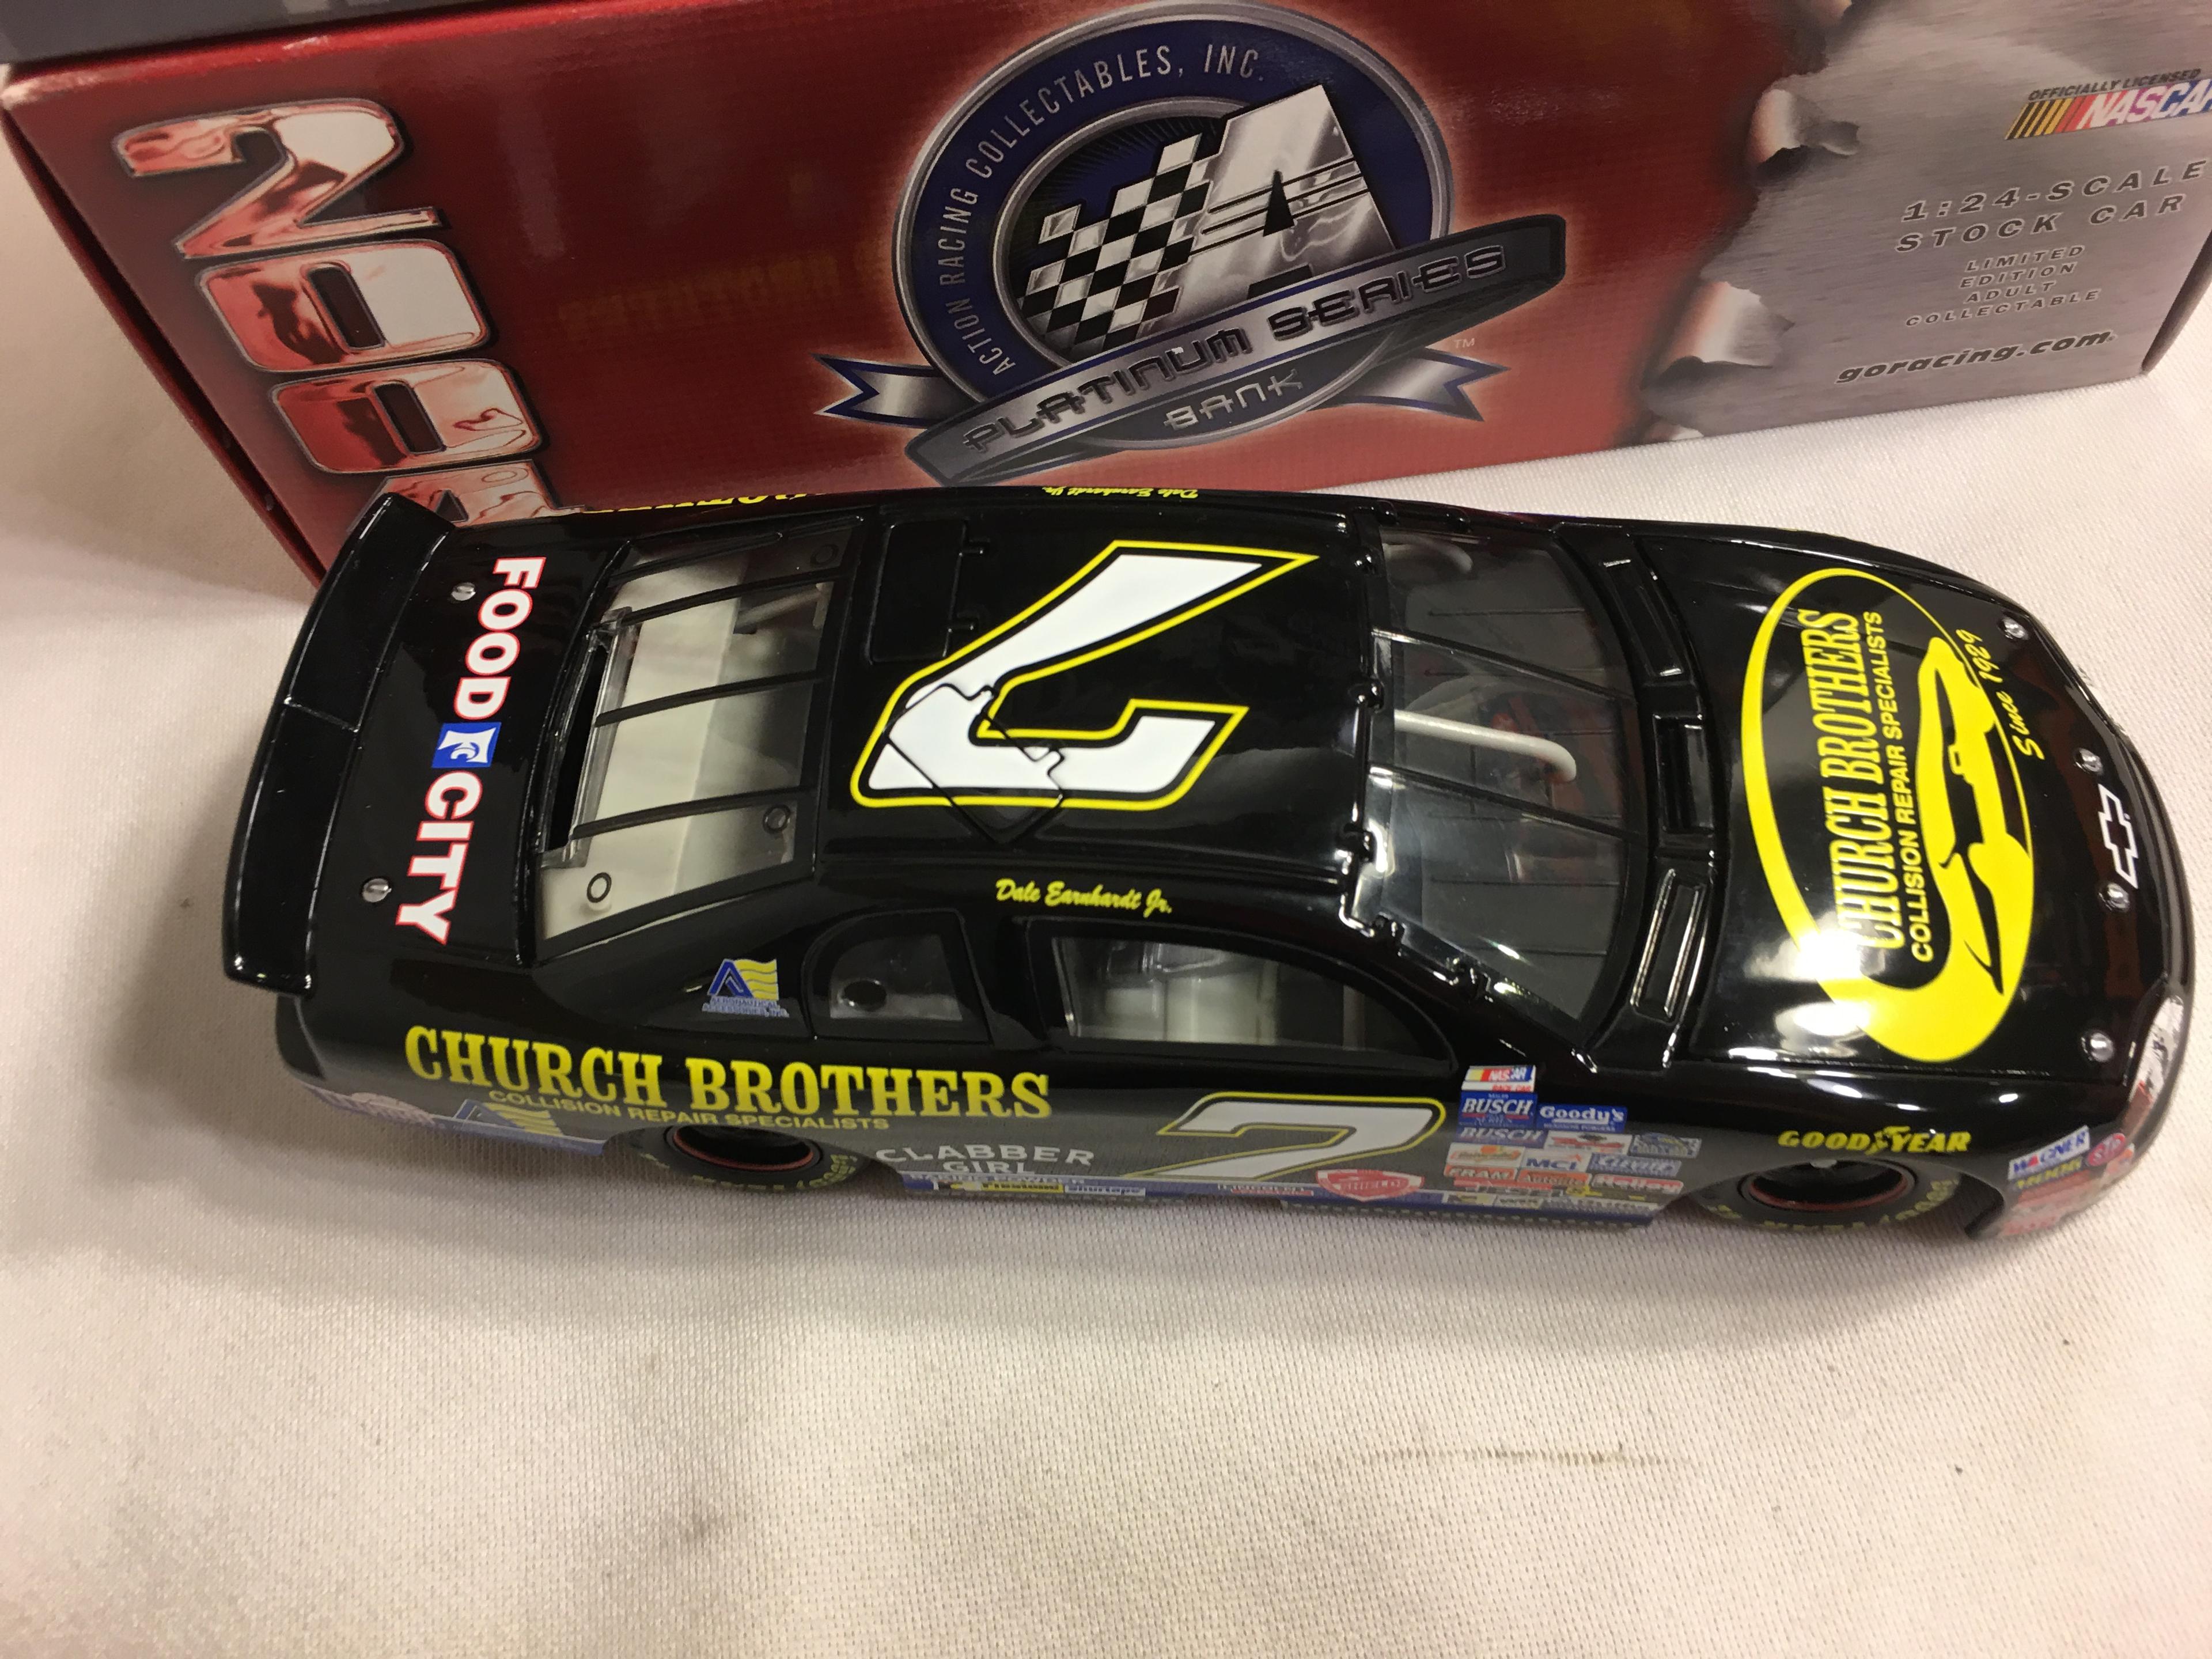 Action  1997 Monte Carlo Earnhardt Jr. #7 Church Brothers 1:24 Scale Stock Car Ltd. Edt. #105968